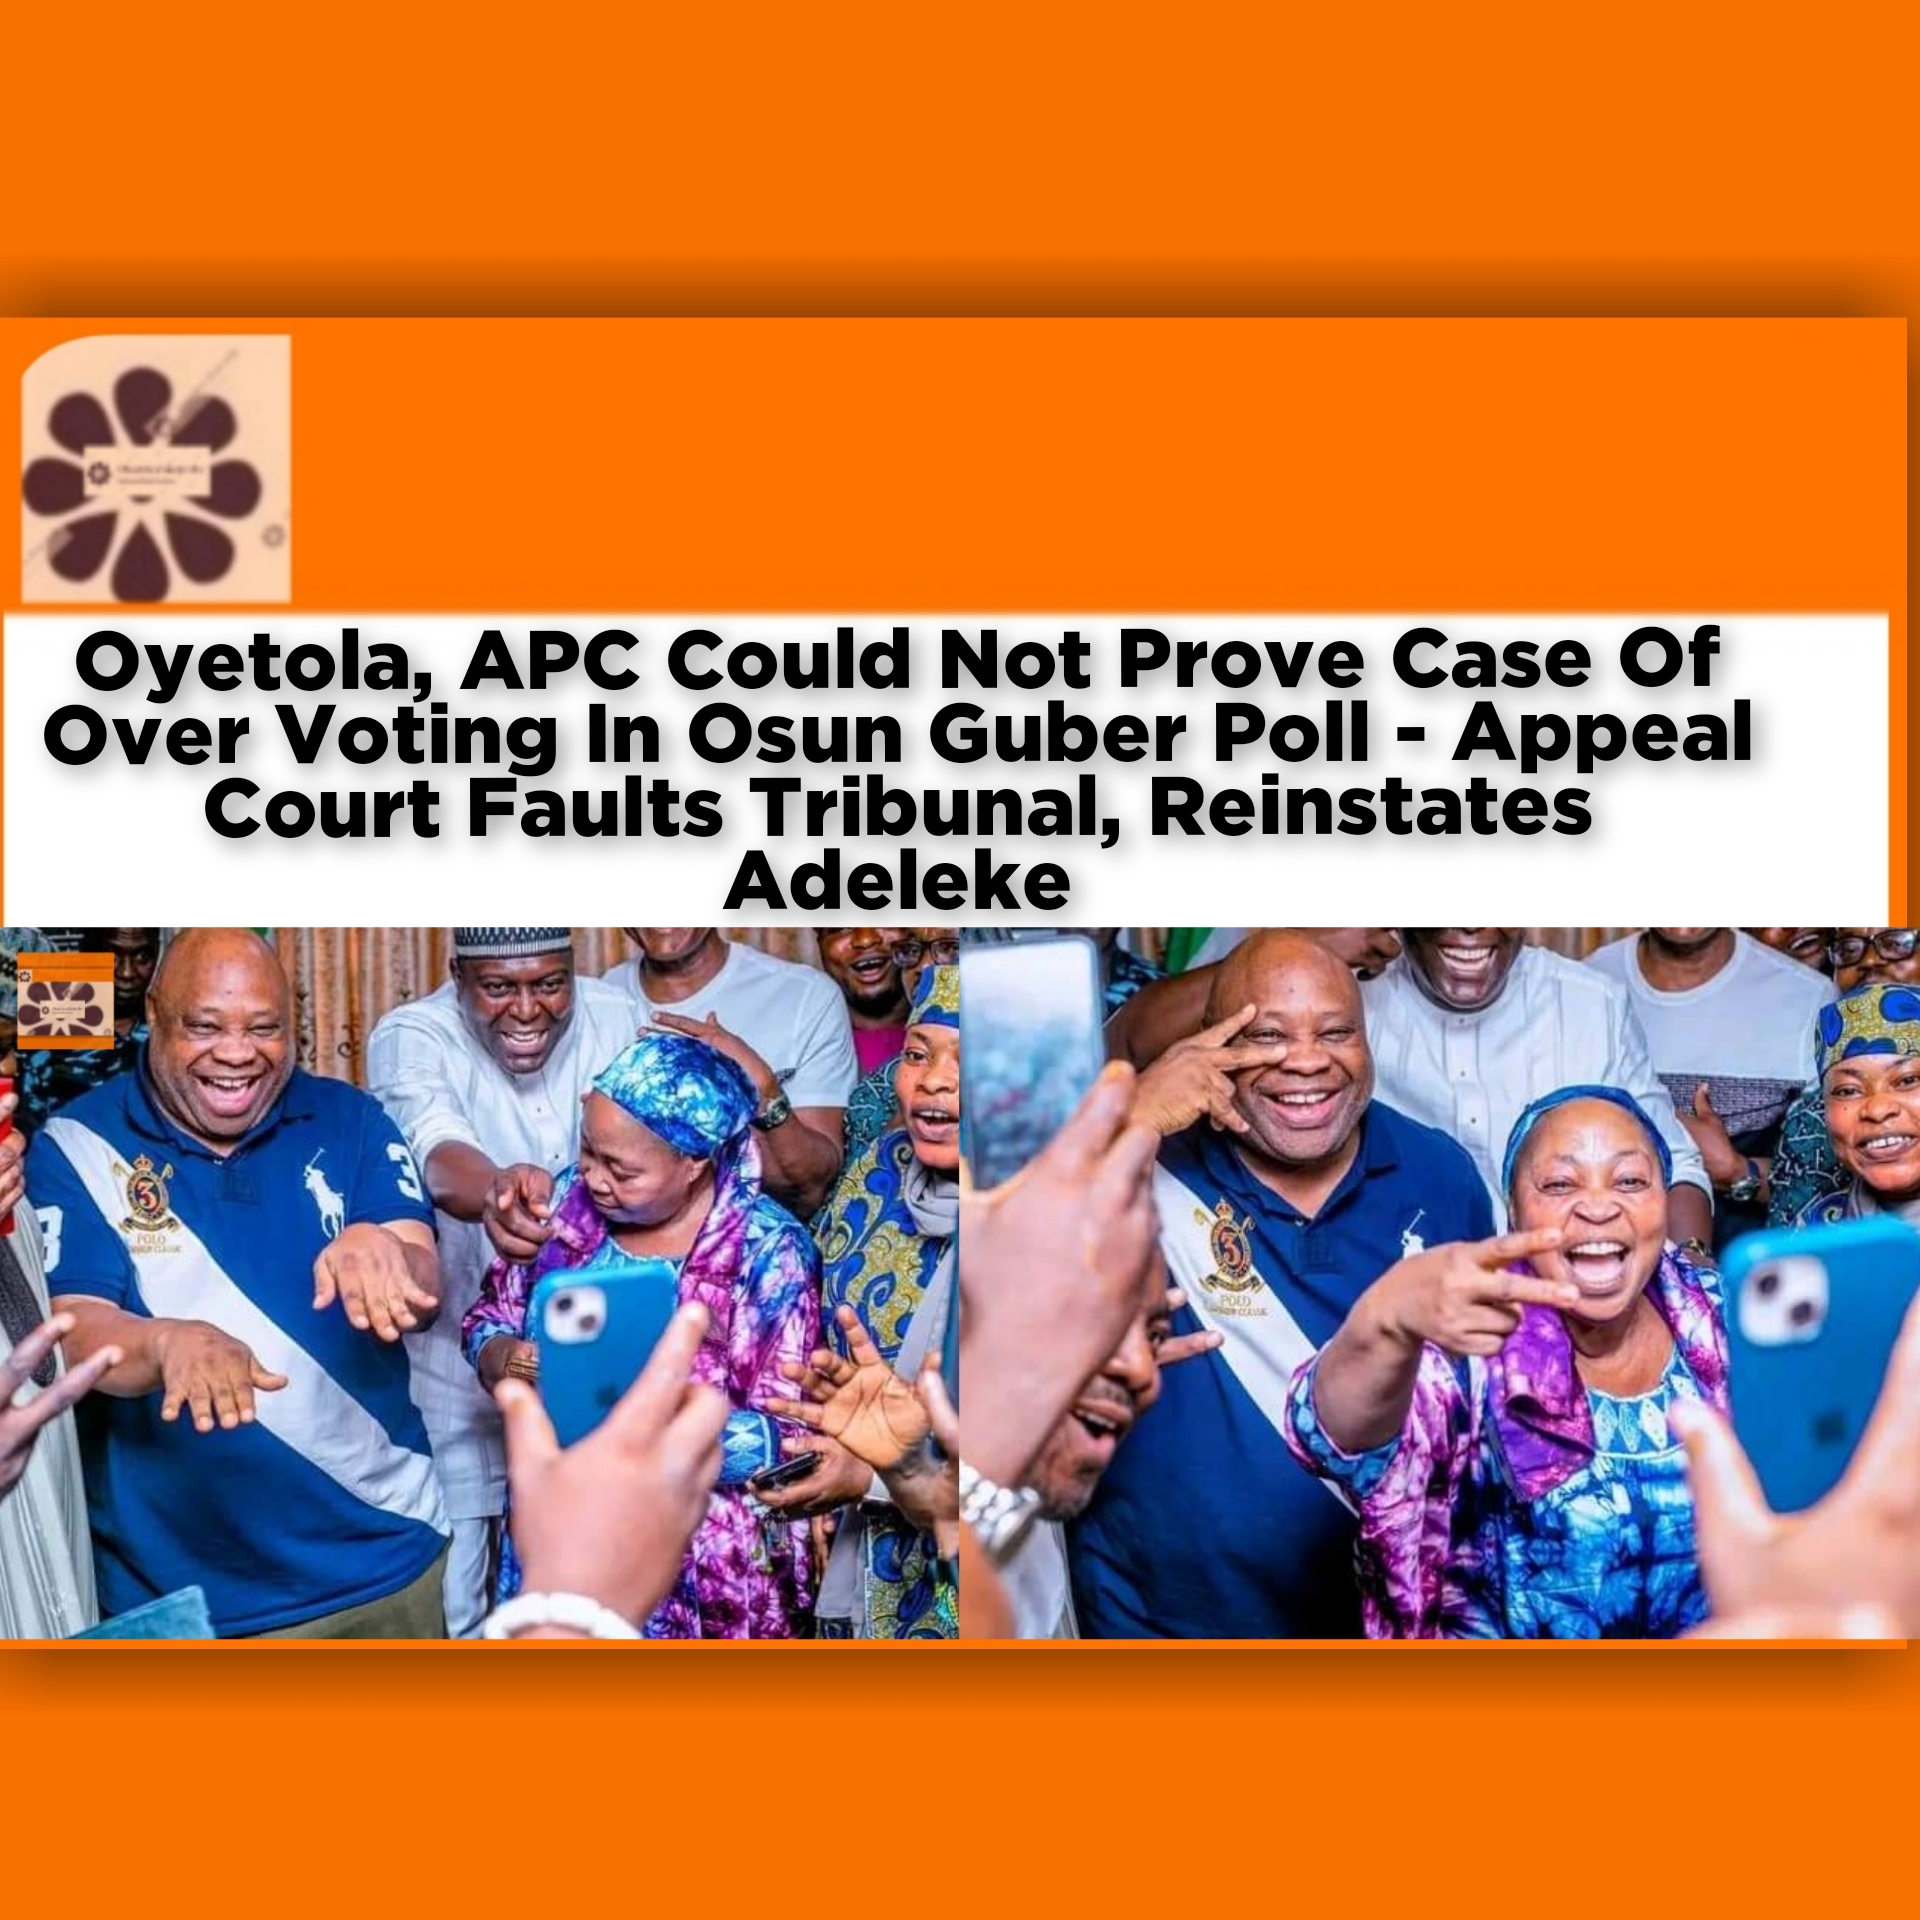 Oyetola, APC Could Not Prove Case Of Over Voting In Osun Guber Poll - Appeal Court Faults Tribunal, Reinstates Adeleke ~ OsazuwaAkonedo #cbn